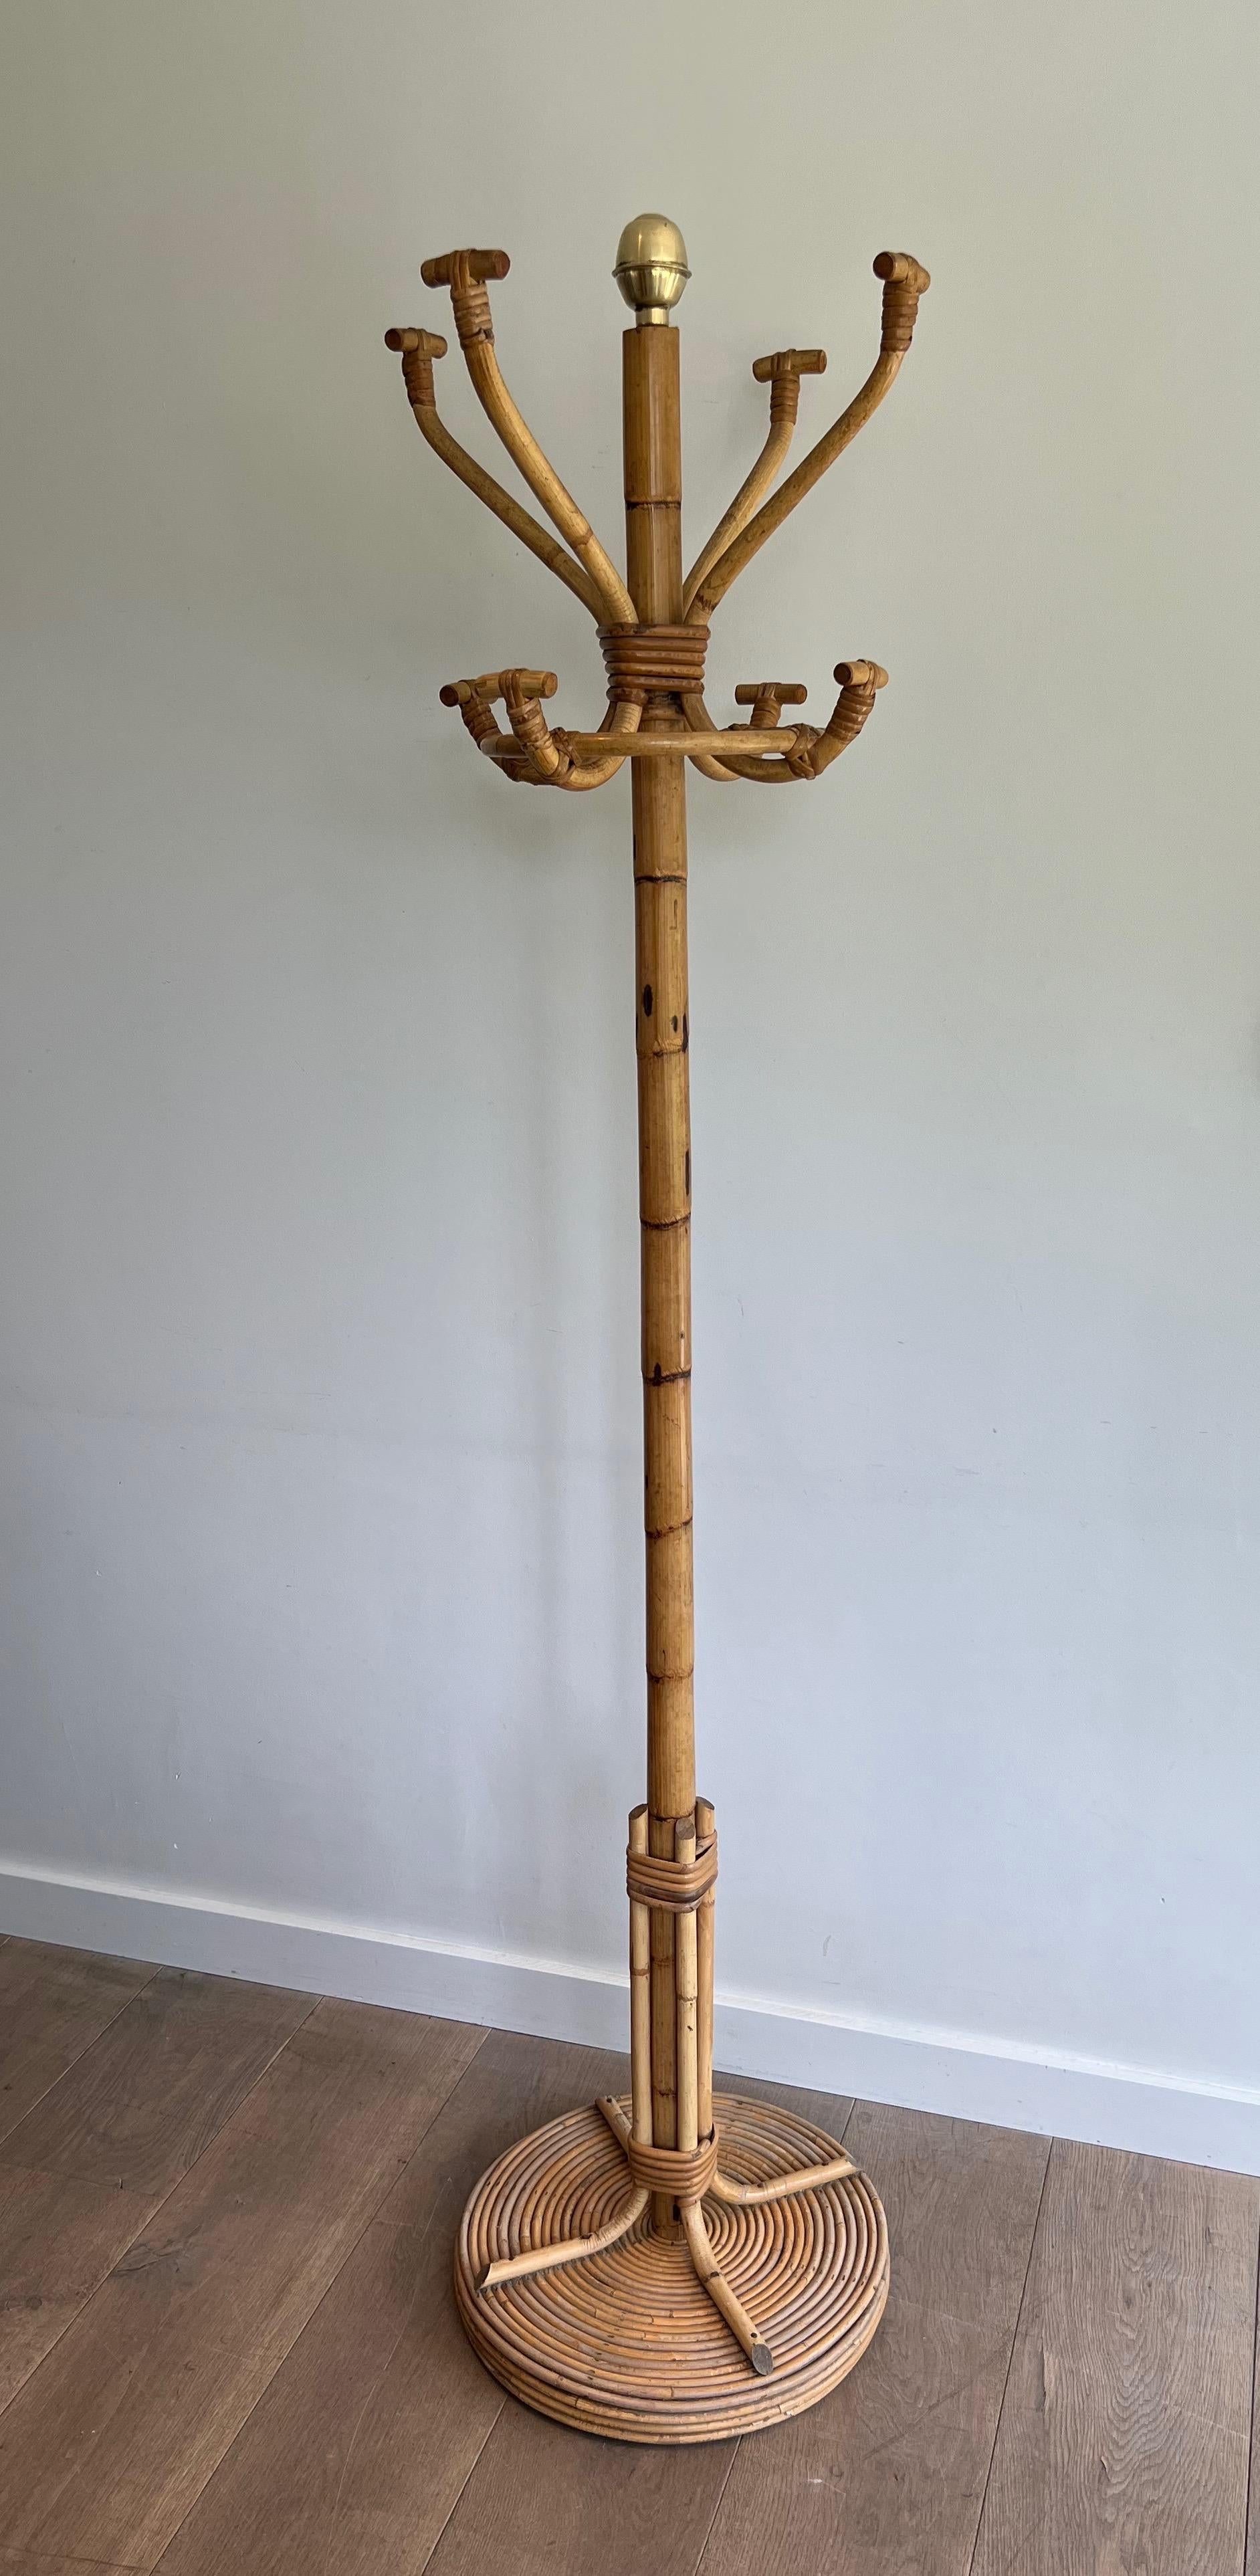 This very nice and decorative coat rack on stand is all made of rattan. This is a French Work. Circa 1970